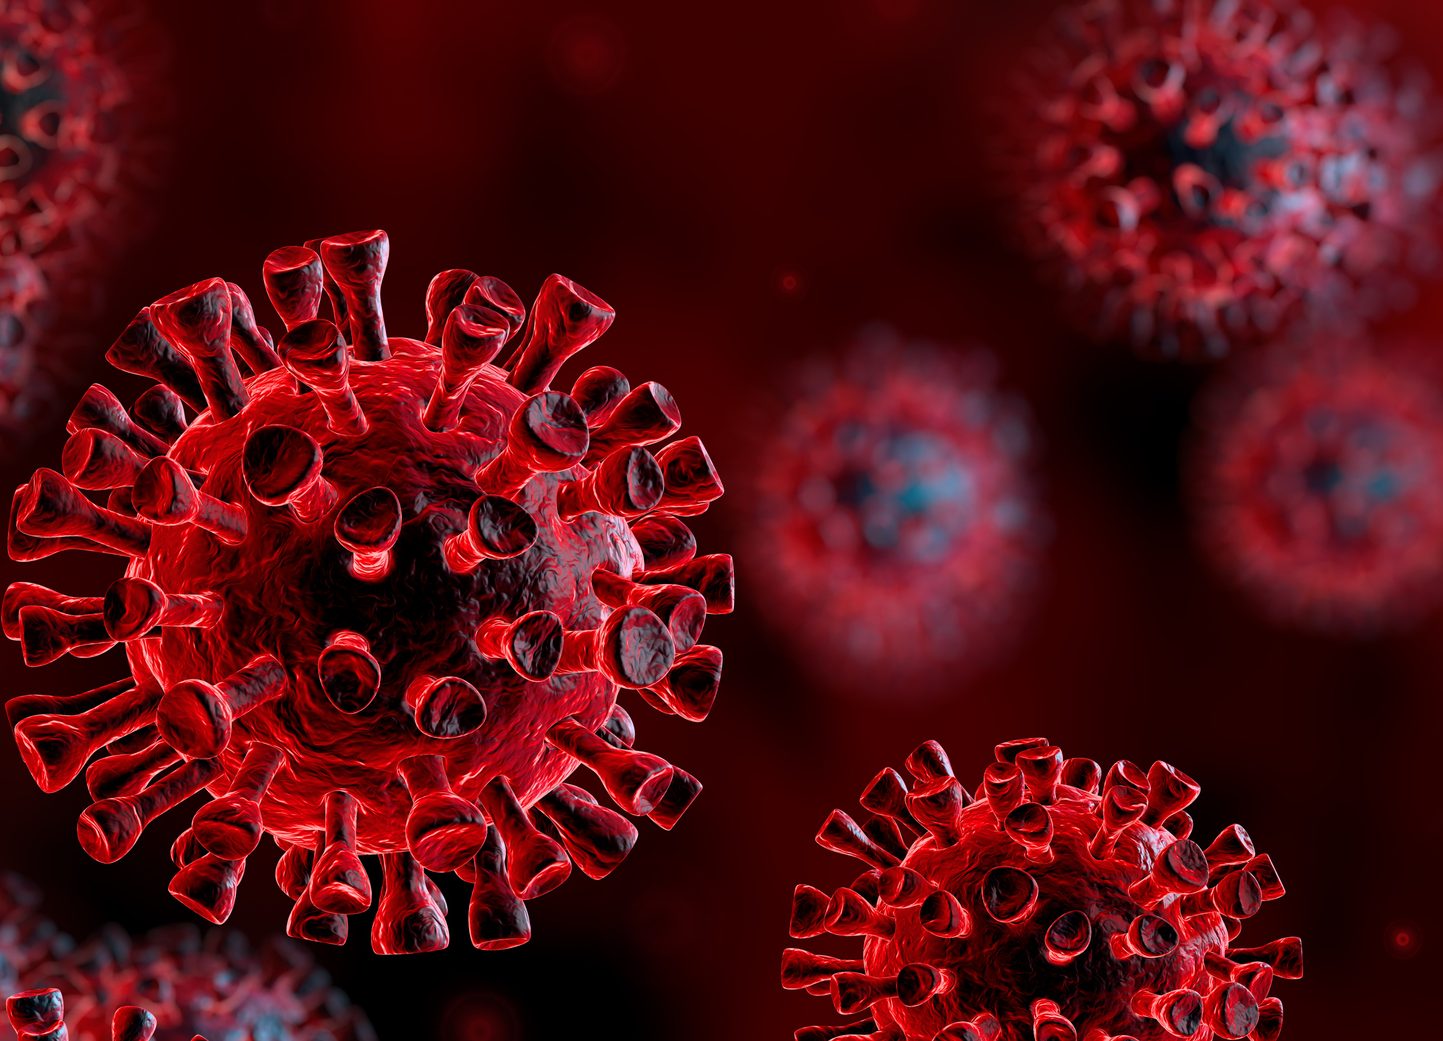 FUNIBER-corona-virus-in-red-background-microbiology-and-virology-concept-tres-d-rendering